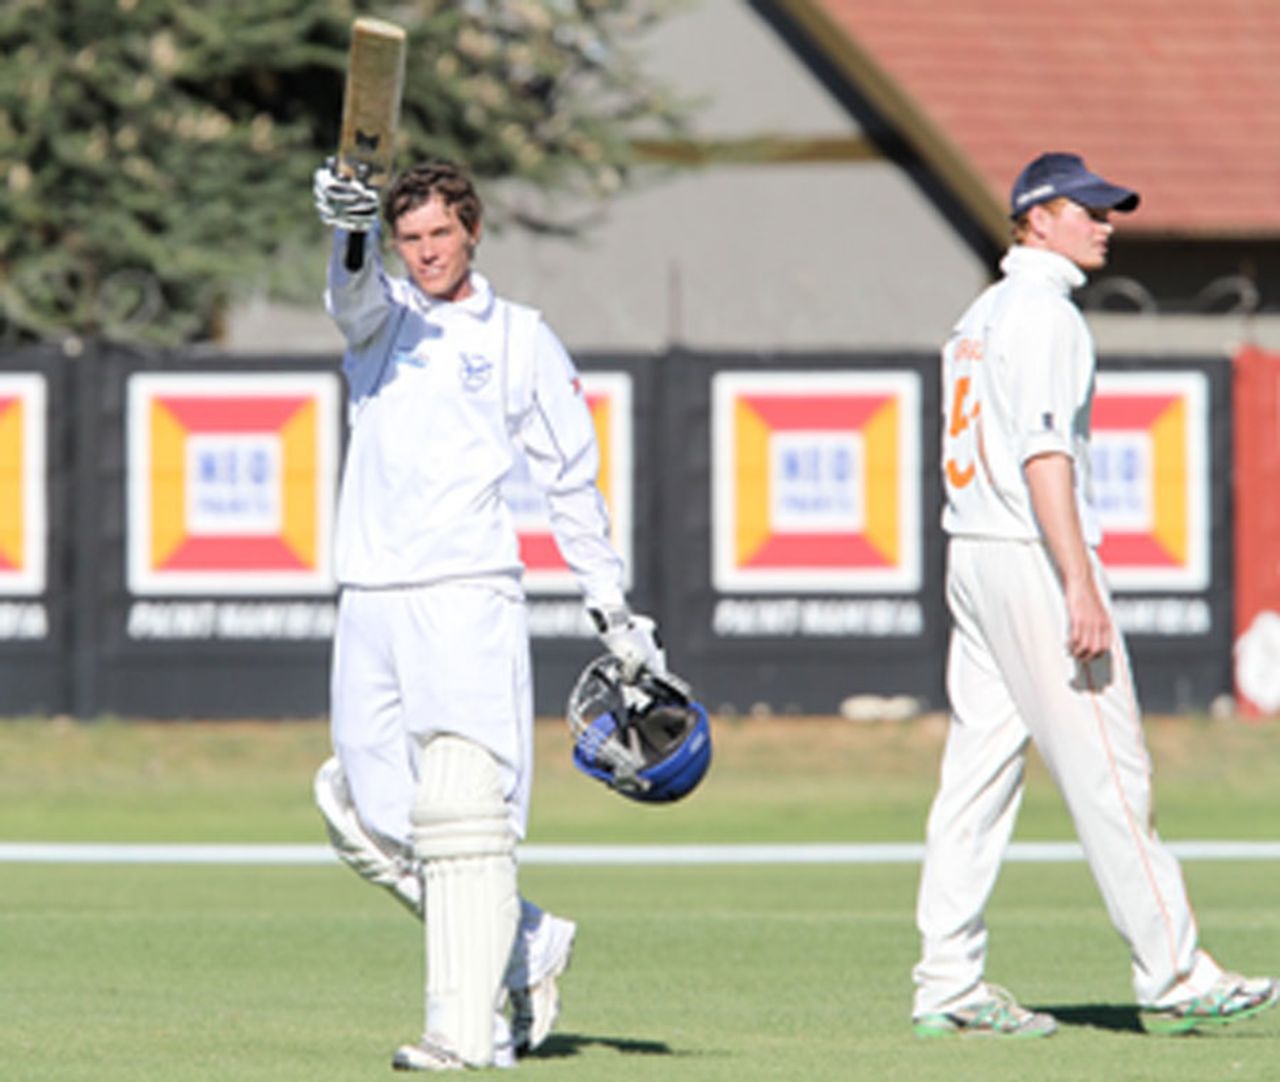 Raymond van Schoor acknowledges the crowd after scoring a century, Namibia v Netherlands, ICC Intercontinental Cup 2011-13, 1st day, Windhoek, April 11, 2013